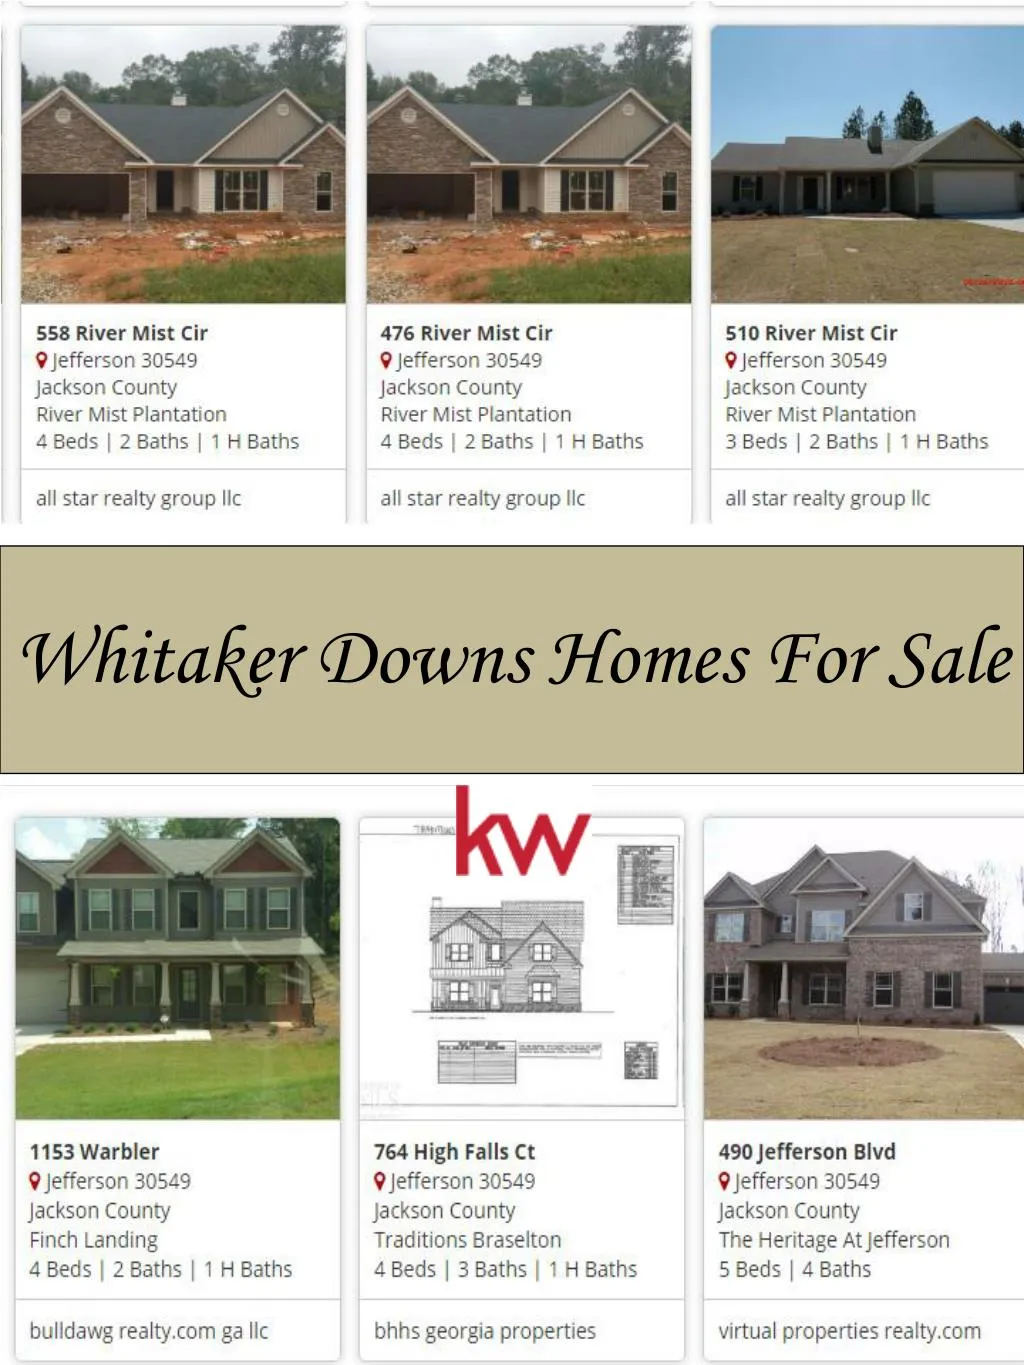 whitaker downs homes for sale